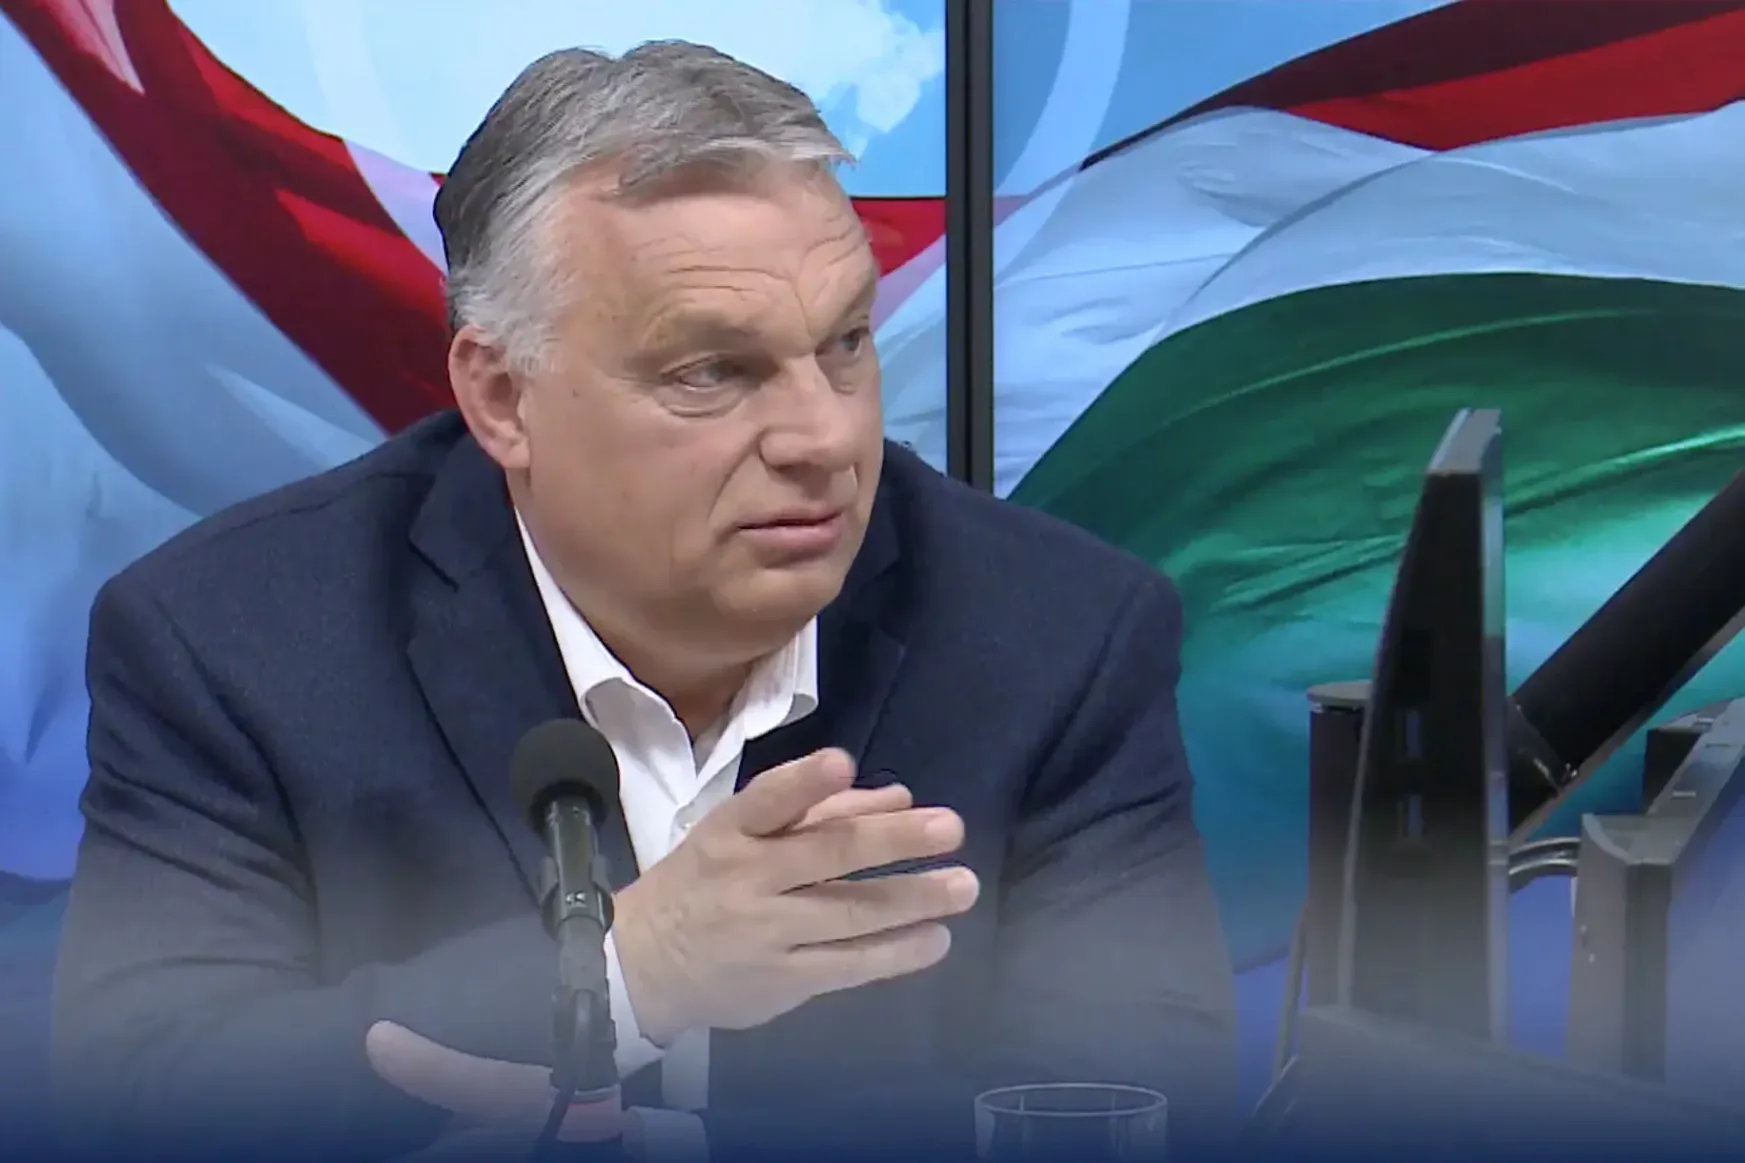 Orbán: The United States is our friend and an important ally